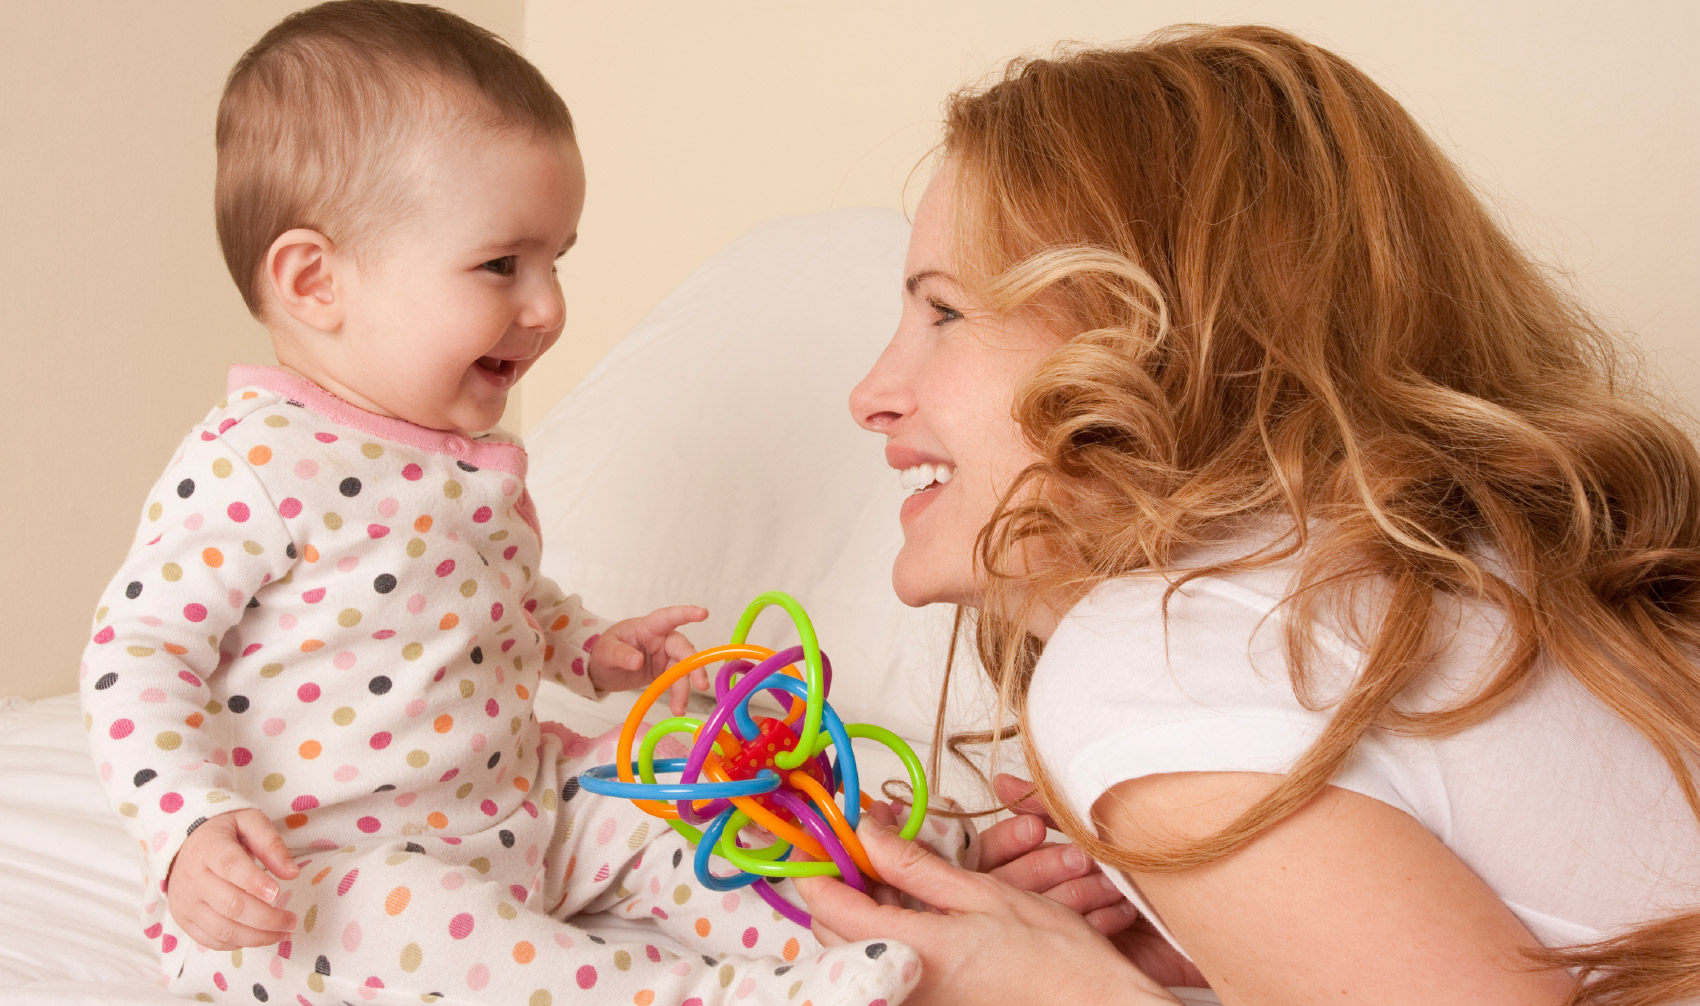 Solutions for hearing loss and language development in infants and children